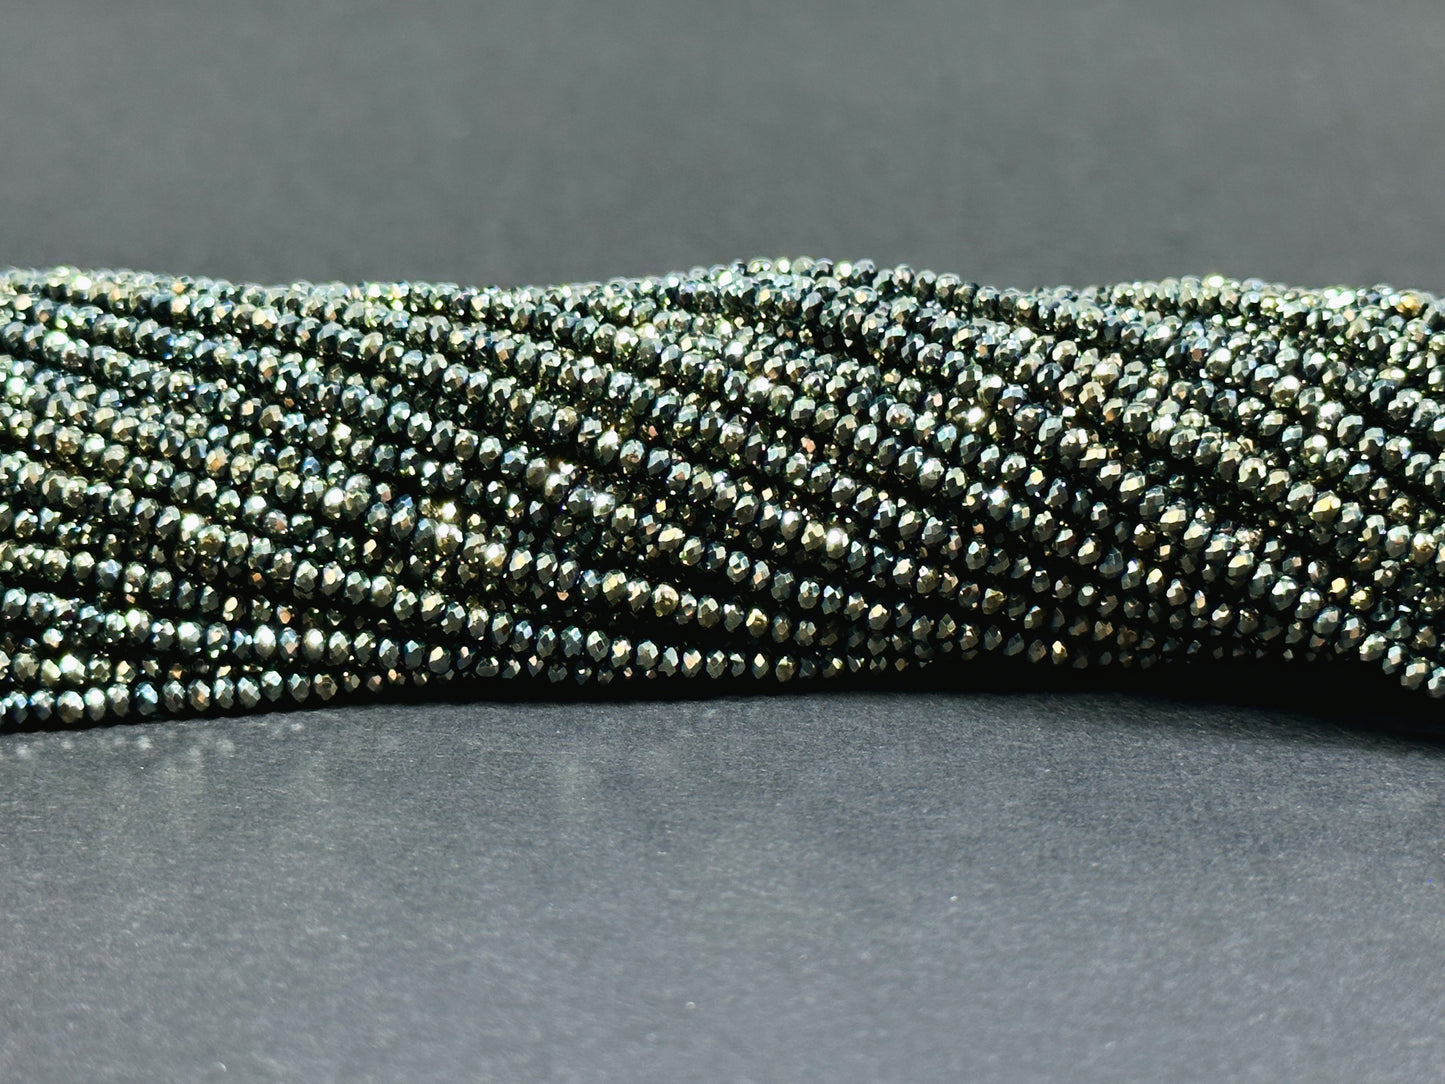 Beautiful Chinese Crystal Glass Beads, Faceted 2mm Rondelle Shape Beads, Gorgeous Iridescent Metallic Silver Color Crystal Glass Beads 15.5"